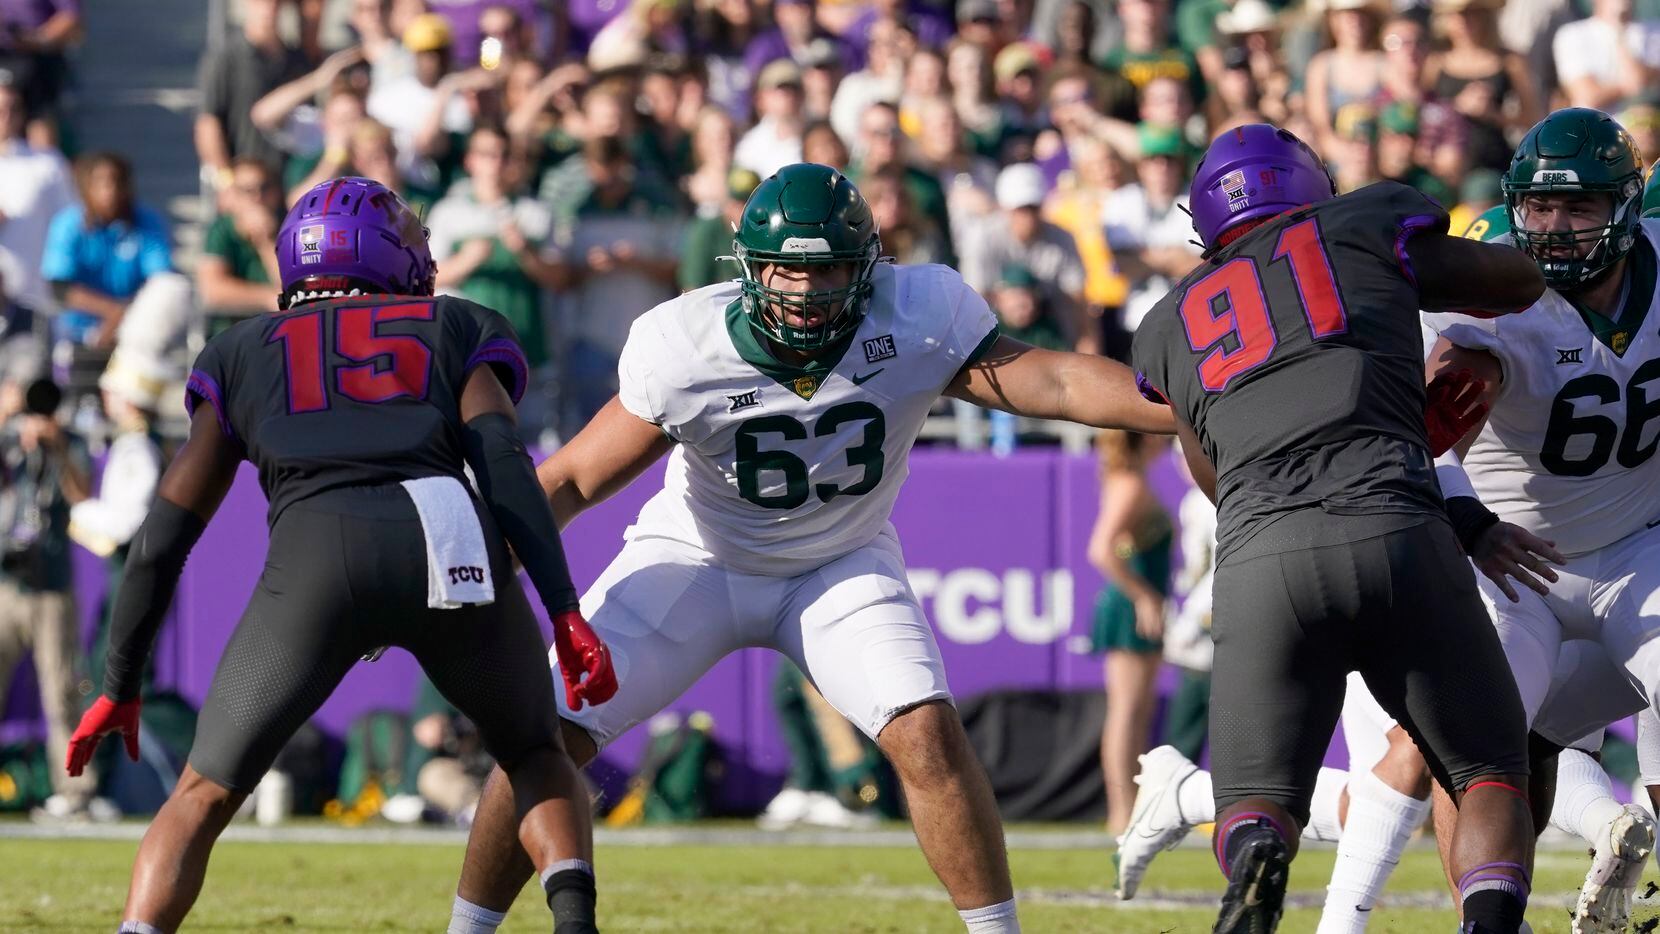 Baylor offensive lineman Grant Miller (63) defends against the rush by TCU safety Josh...